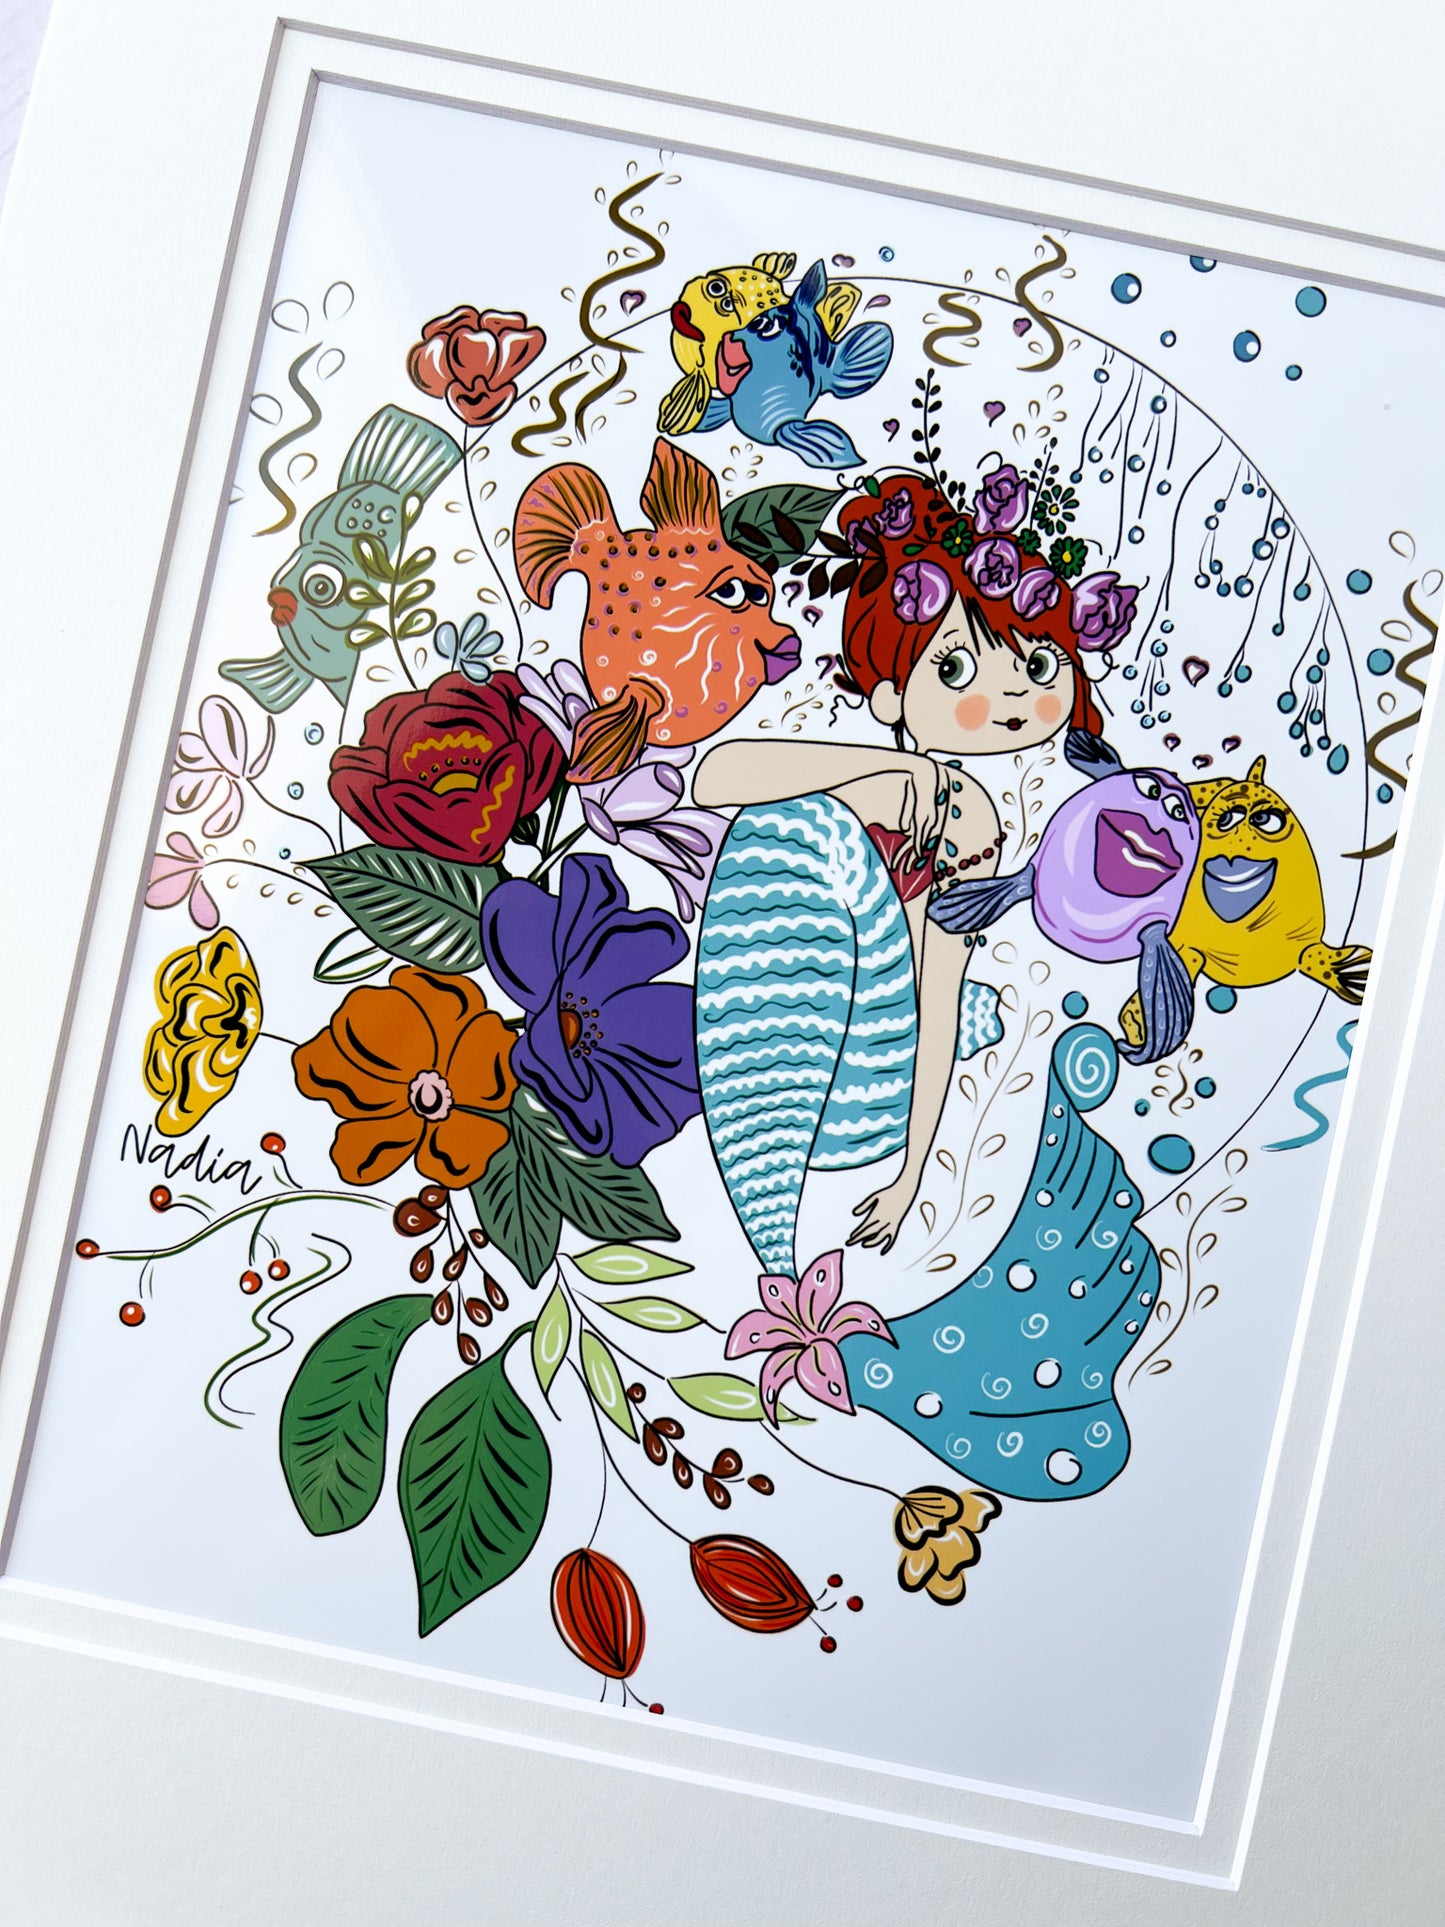 Colorful floral sea life whimsical illustration of a mermaid and fish. Wall decor for a little girl's room. created by local artist in Southern California